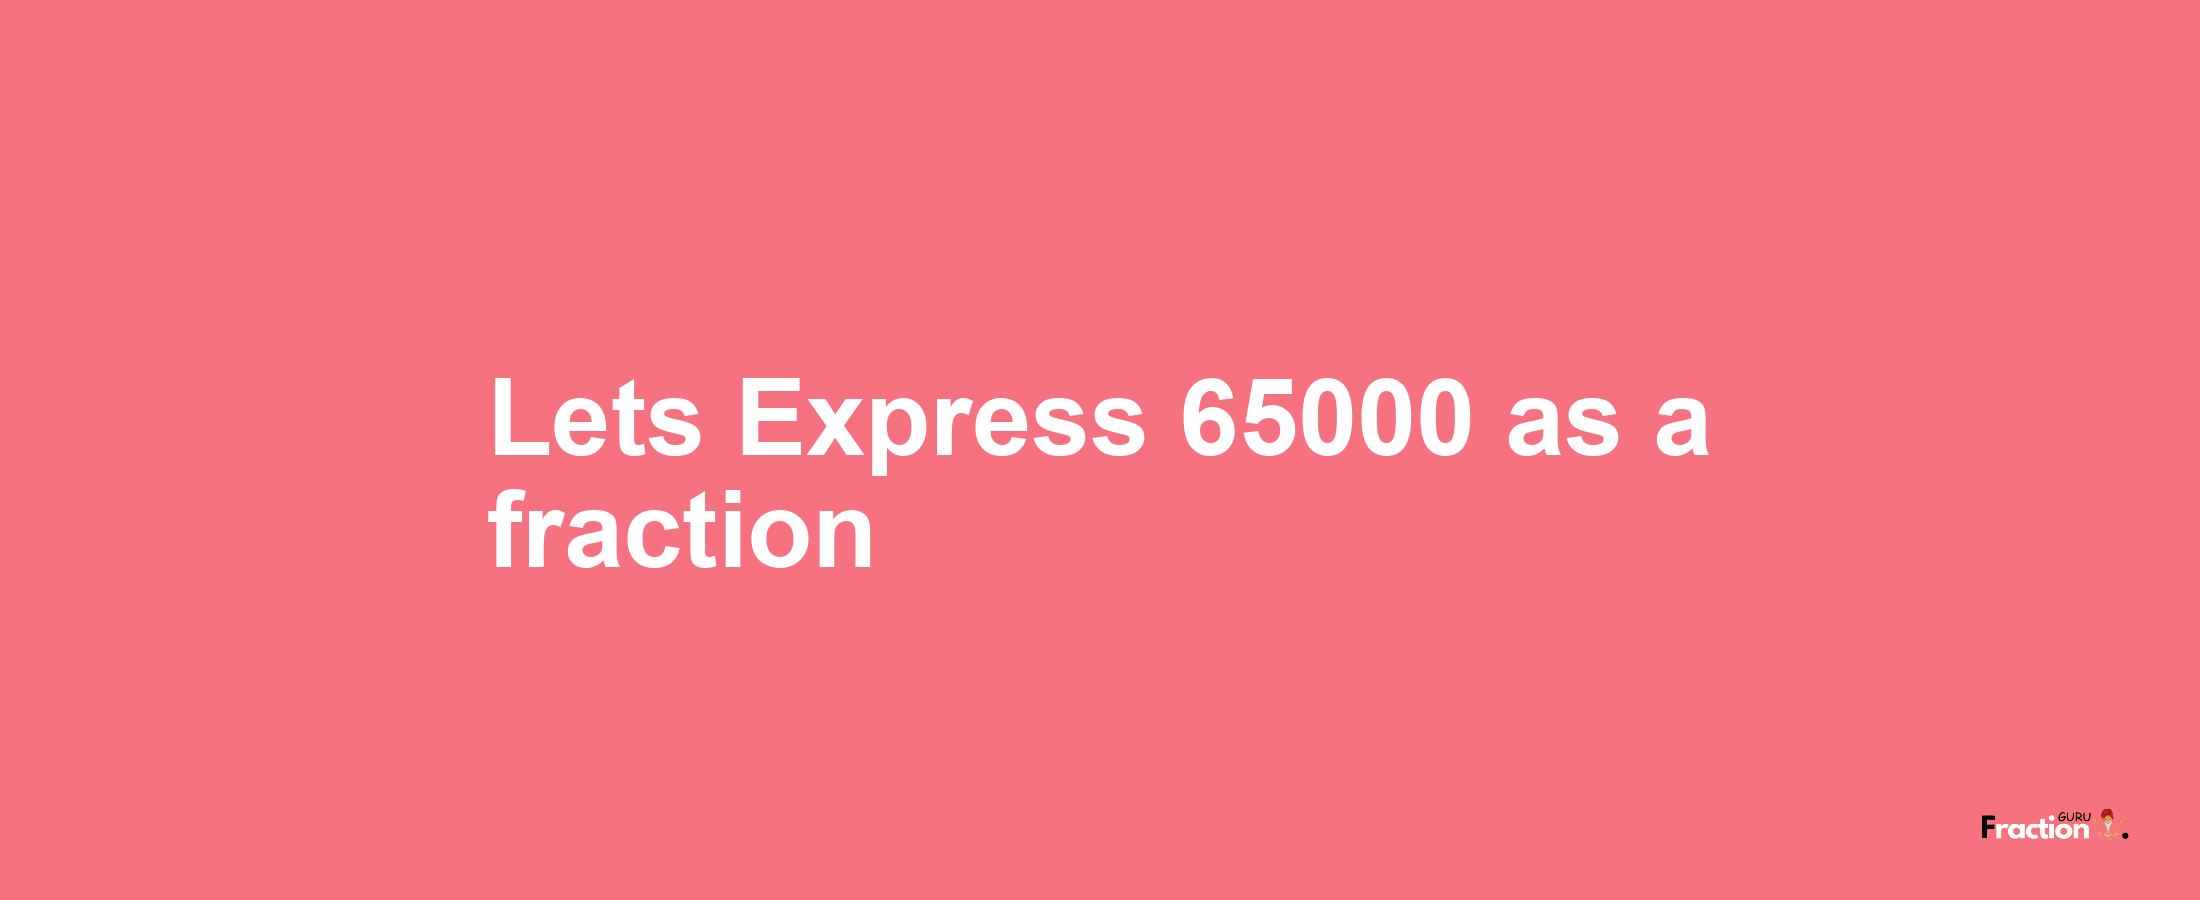 Lets Express 65000 as afraction